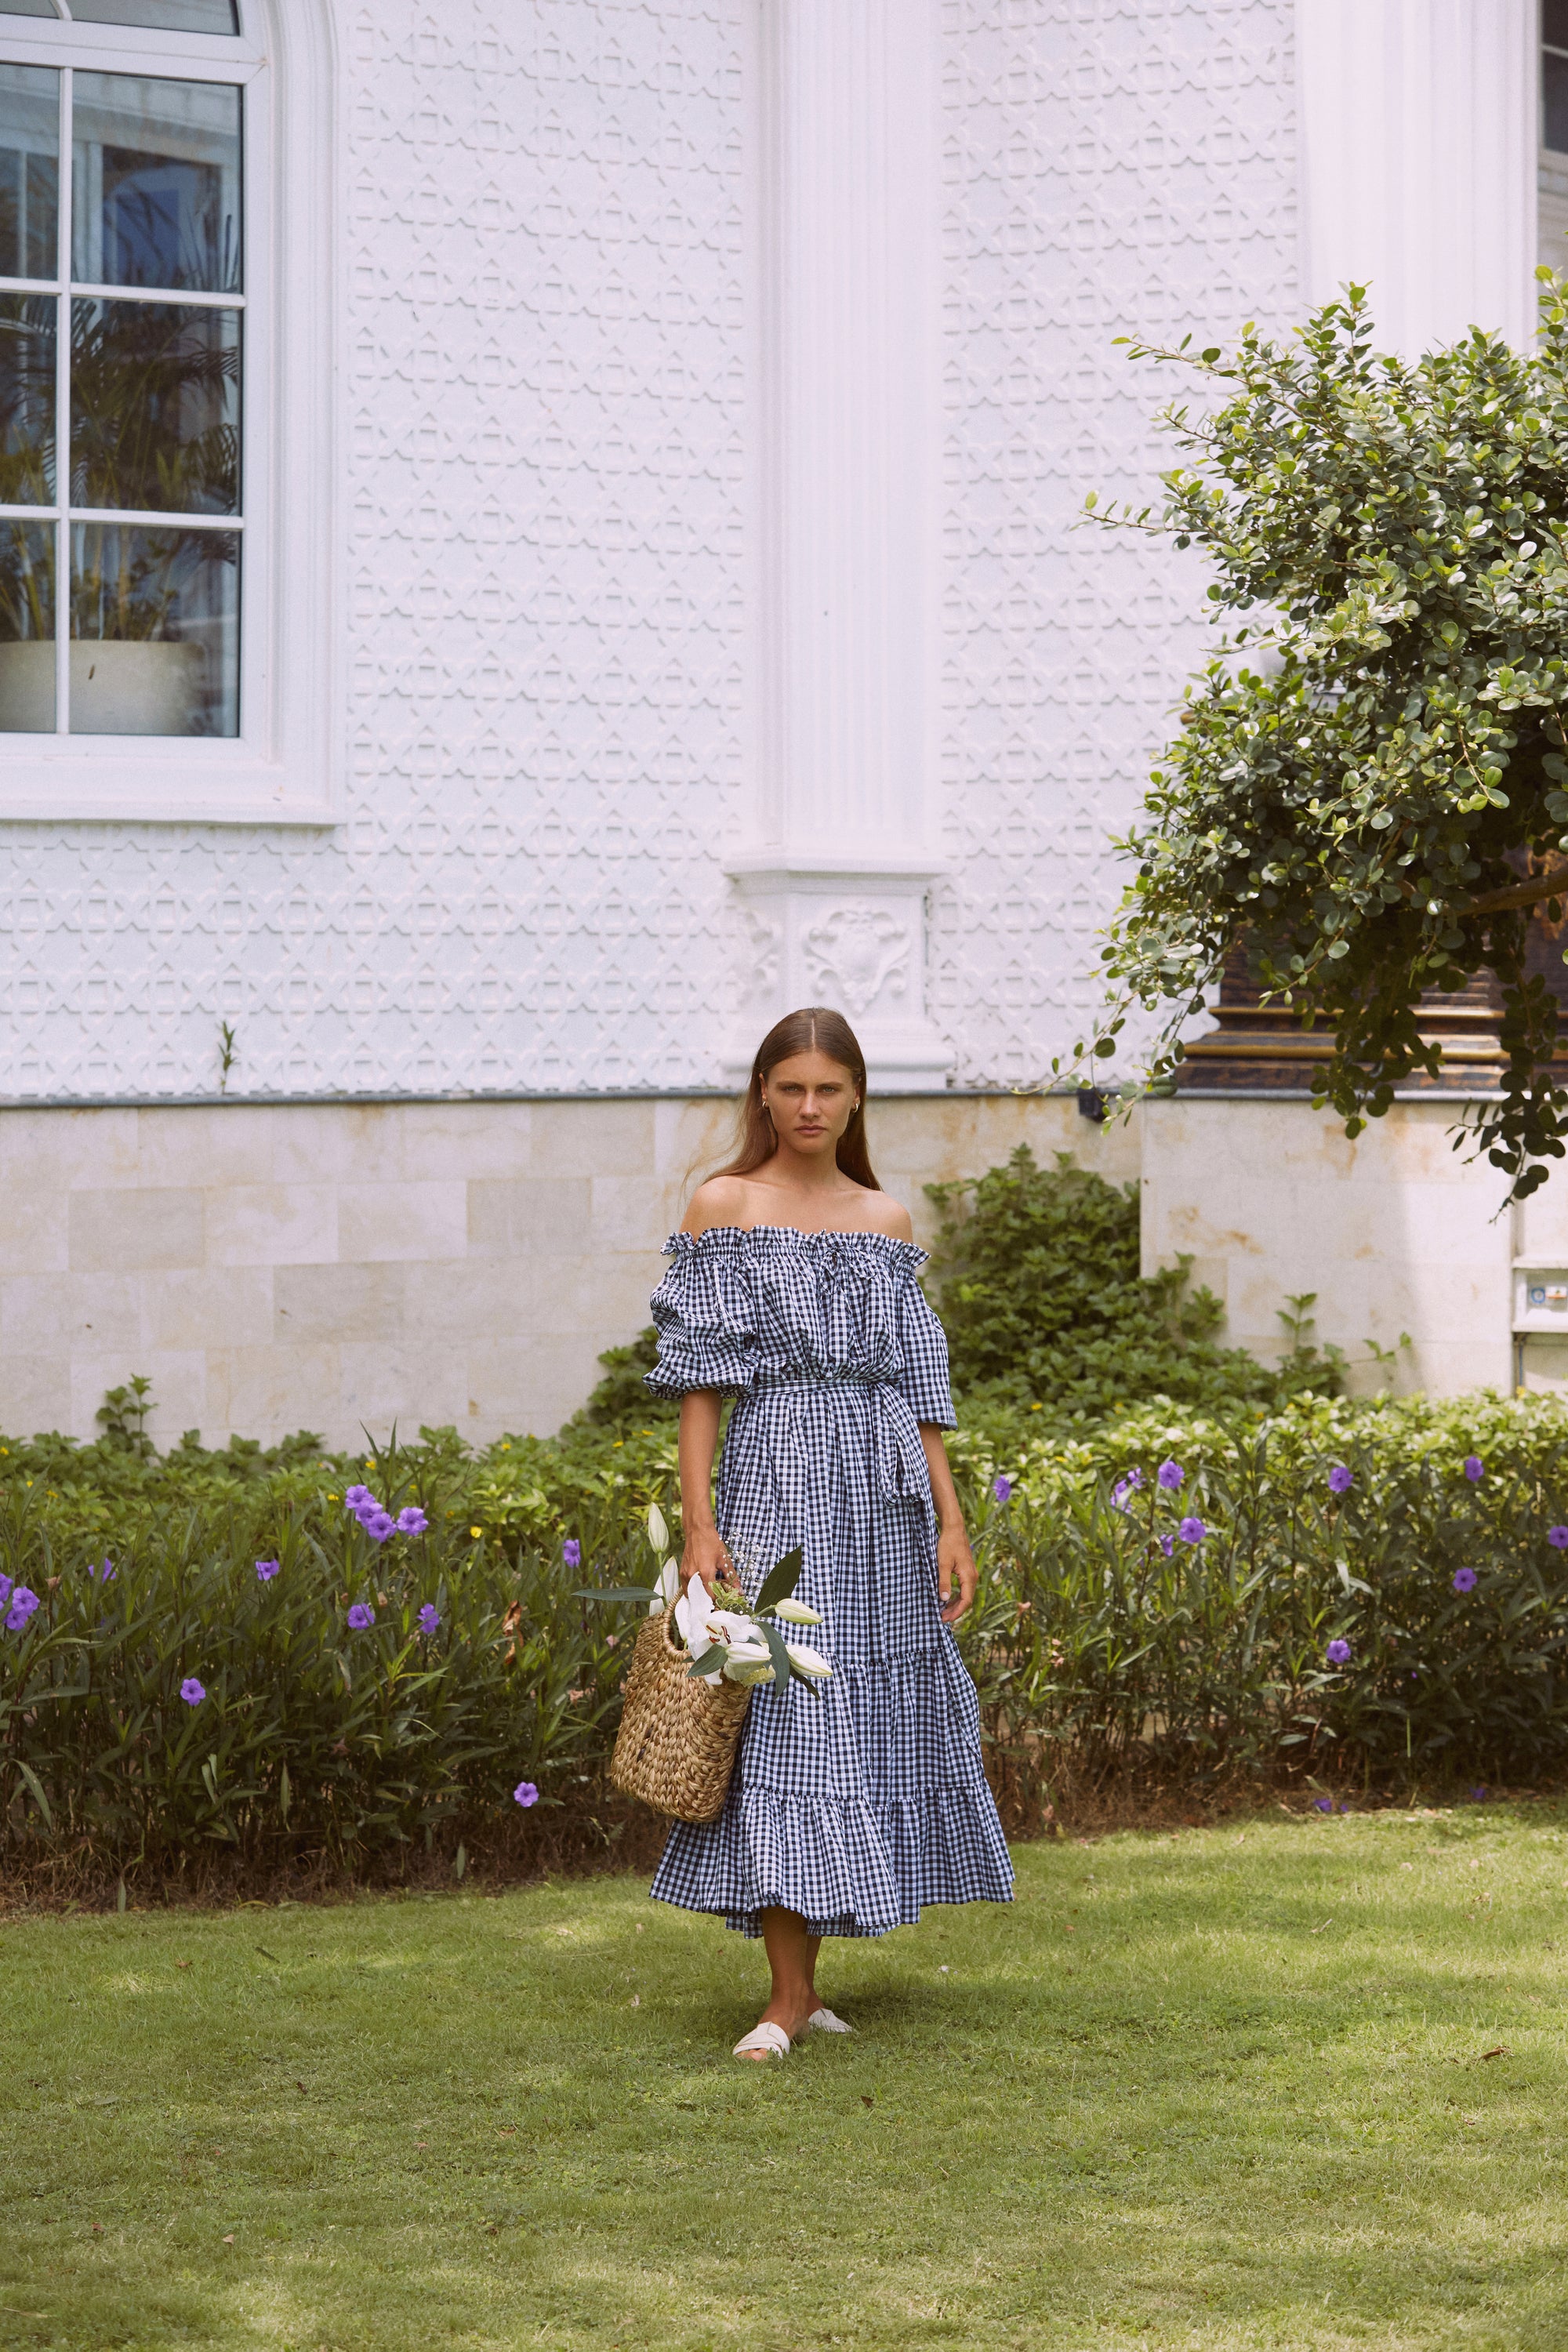 Woman in a maxi gingham dress carrying basket with flowers standing in front landscape